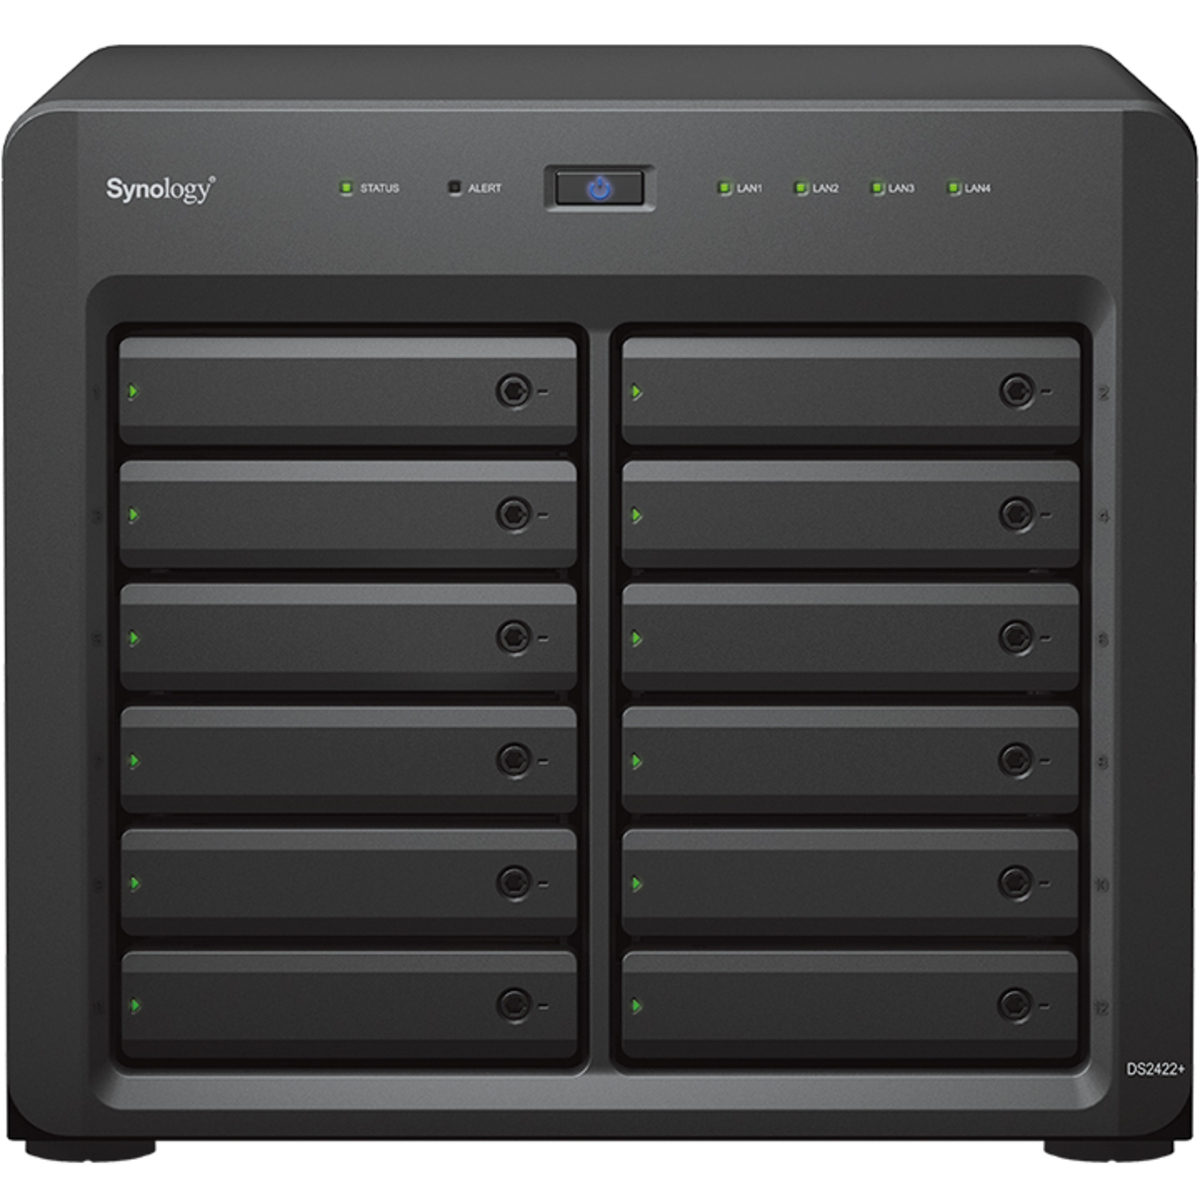 Synology DiskStation DS2422+ 144tb 12-Bay Desktop Multimedia / Power User / Business NAS - Network Attached Storage Device 12x12tb Western Digital Gold WD121KRYZ 3.5 7200rpm SATA 6Gb/s HDD ENTERPRISE Class Drives Installed - Burn-In Tested - FREE RAM UPGRADE DiskStation DS2422+